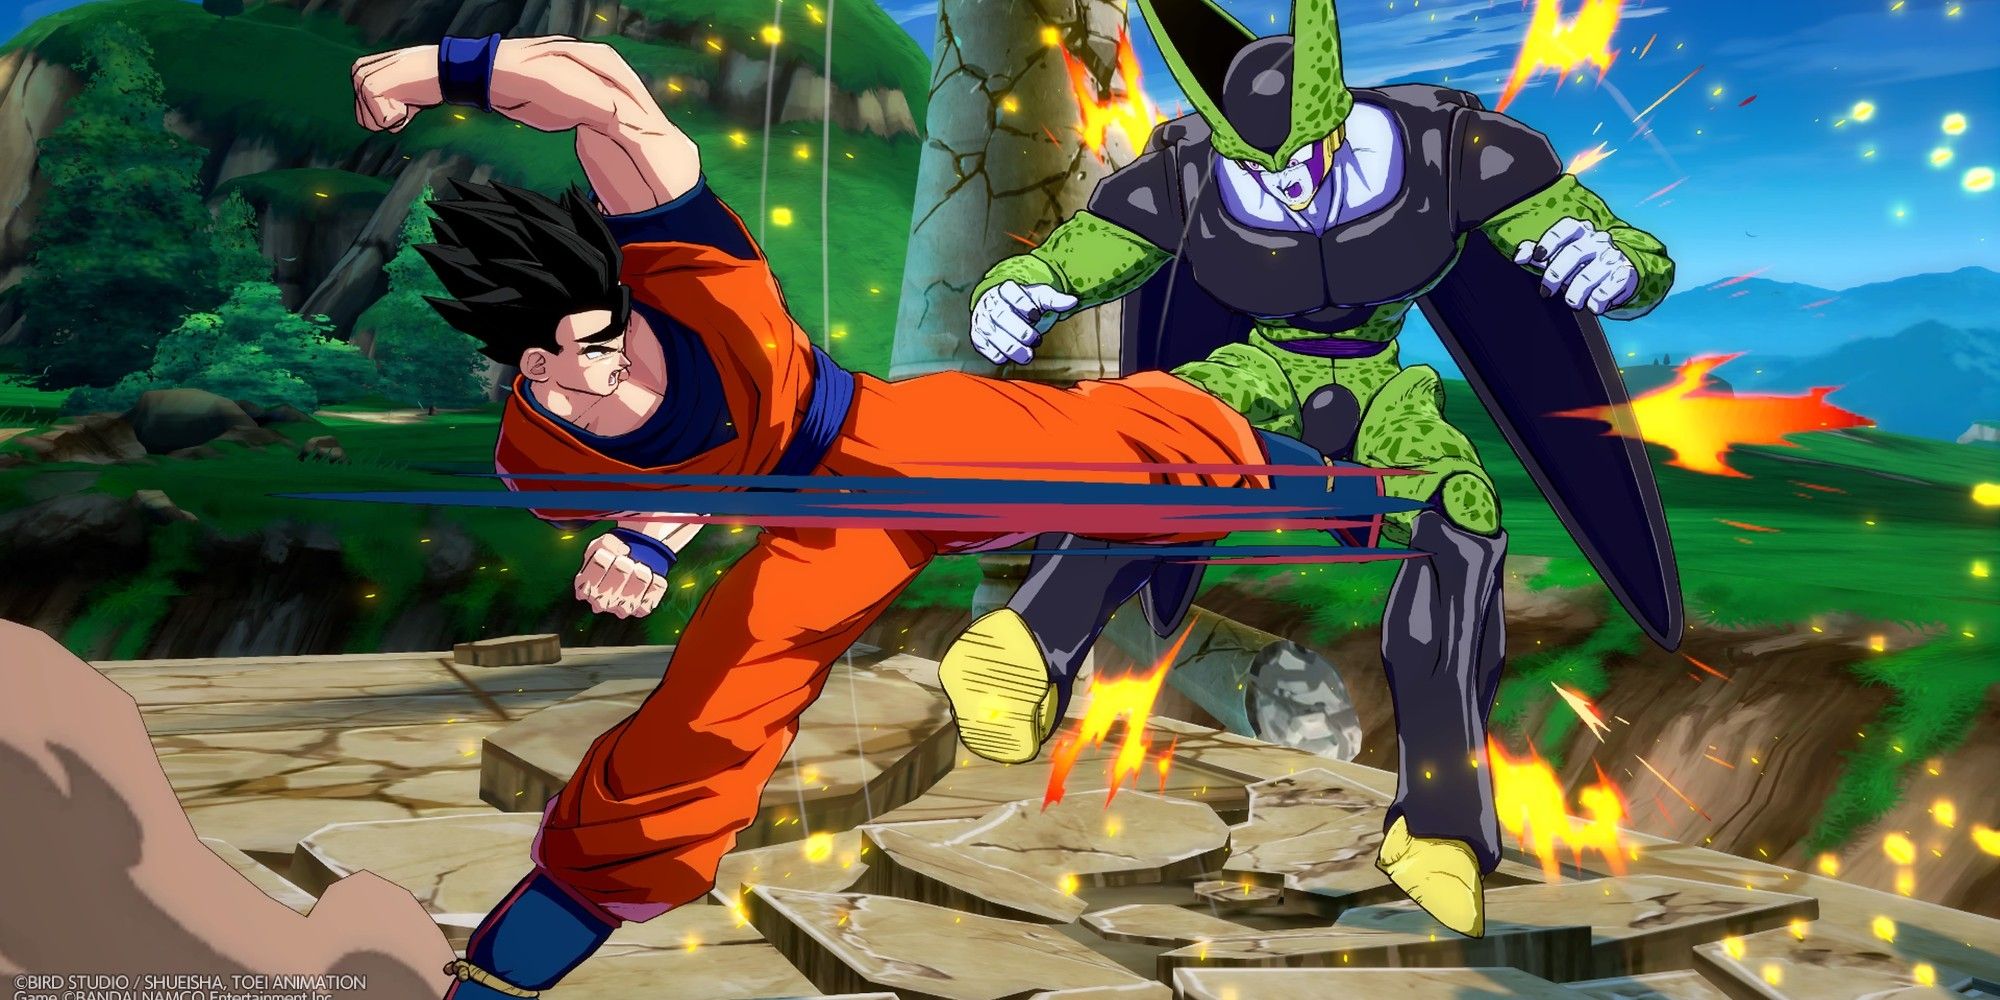 Gohan kicking Cell in Dragon Ball FighterZ